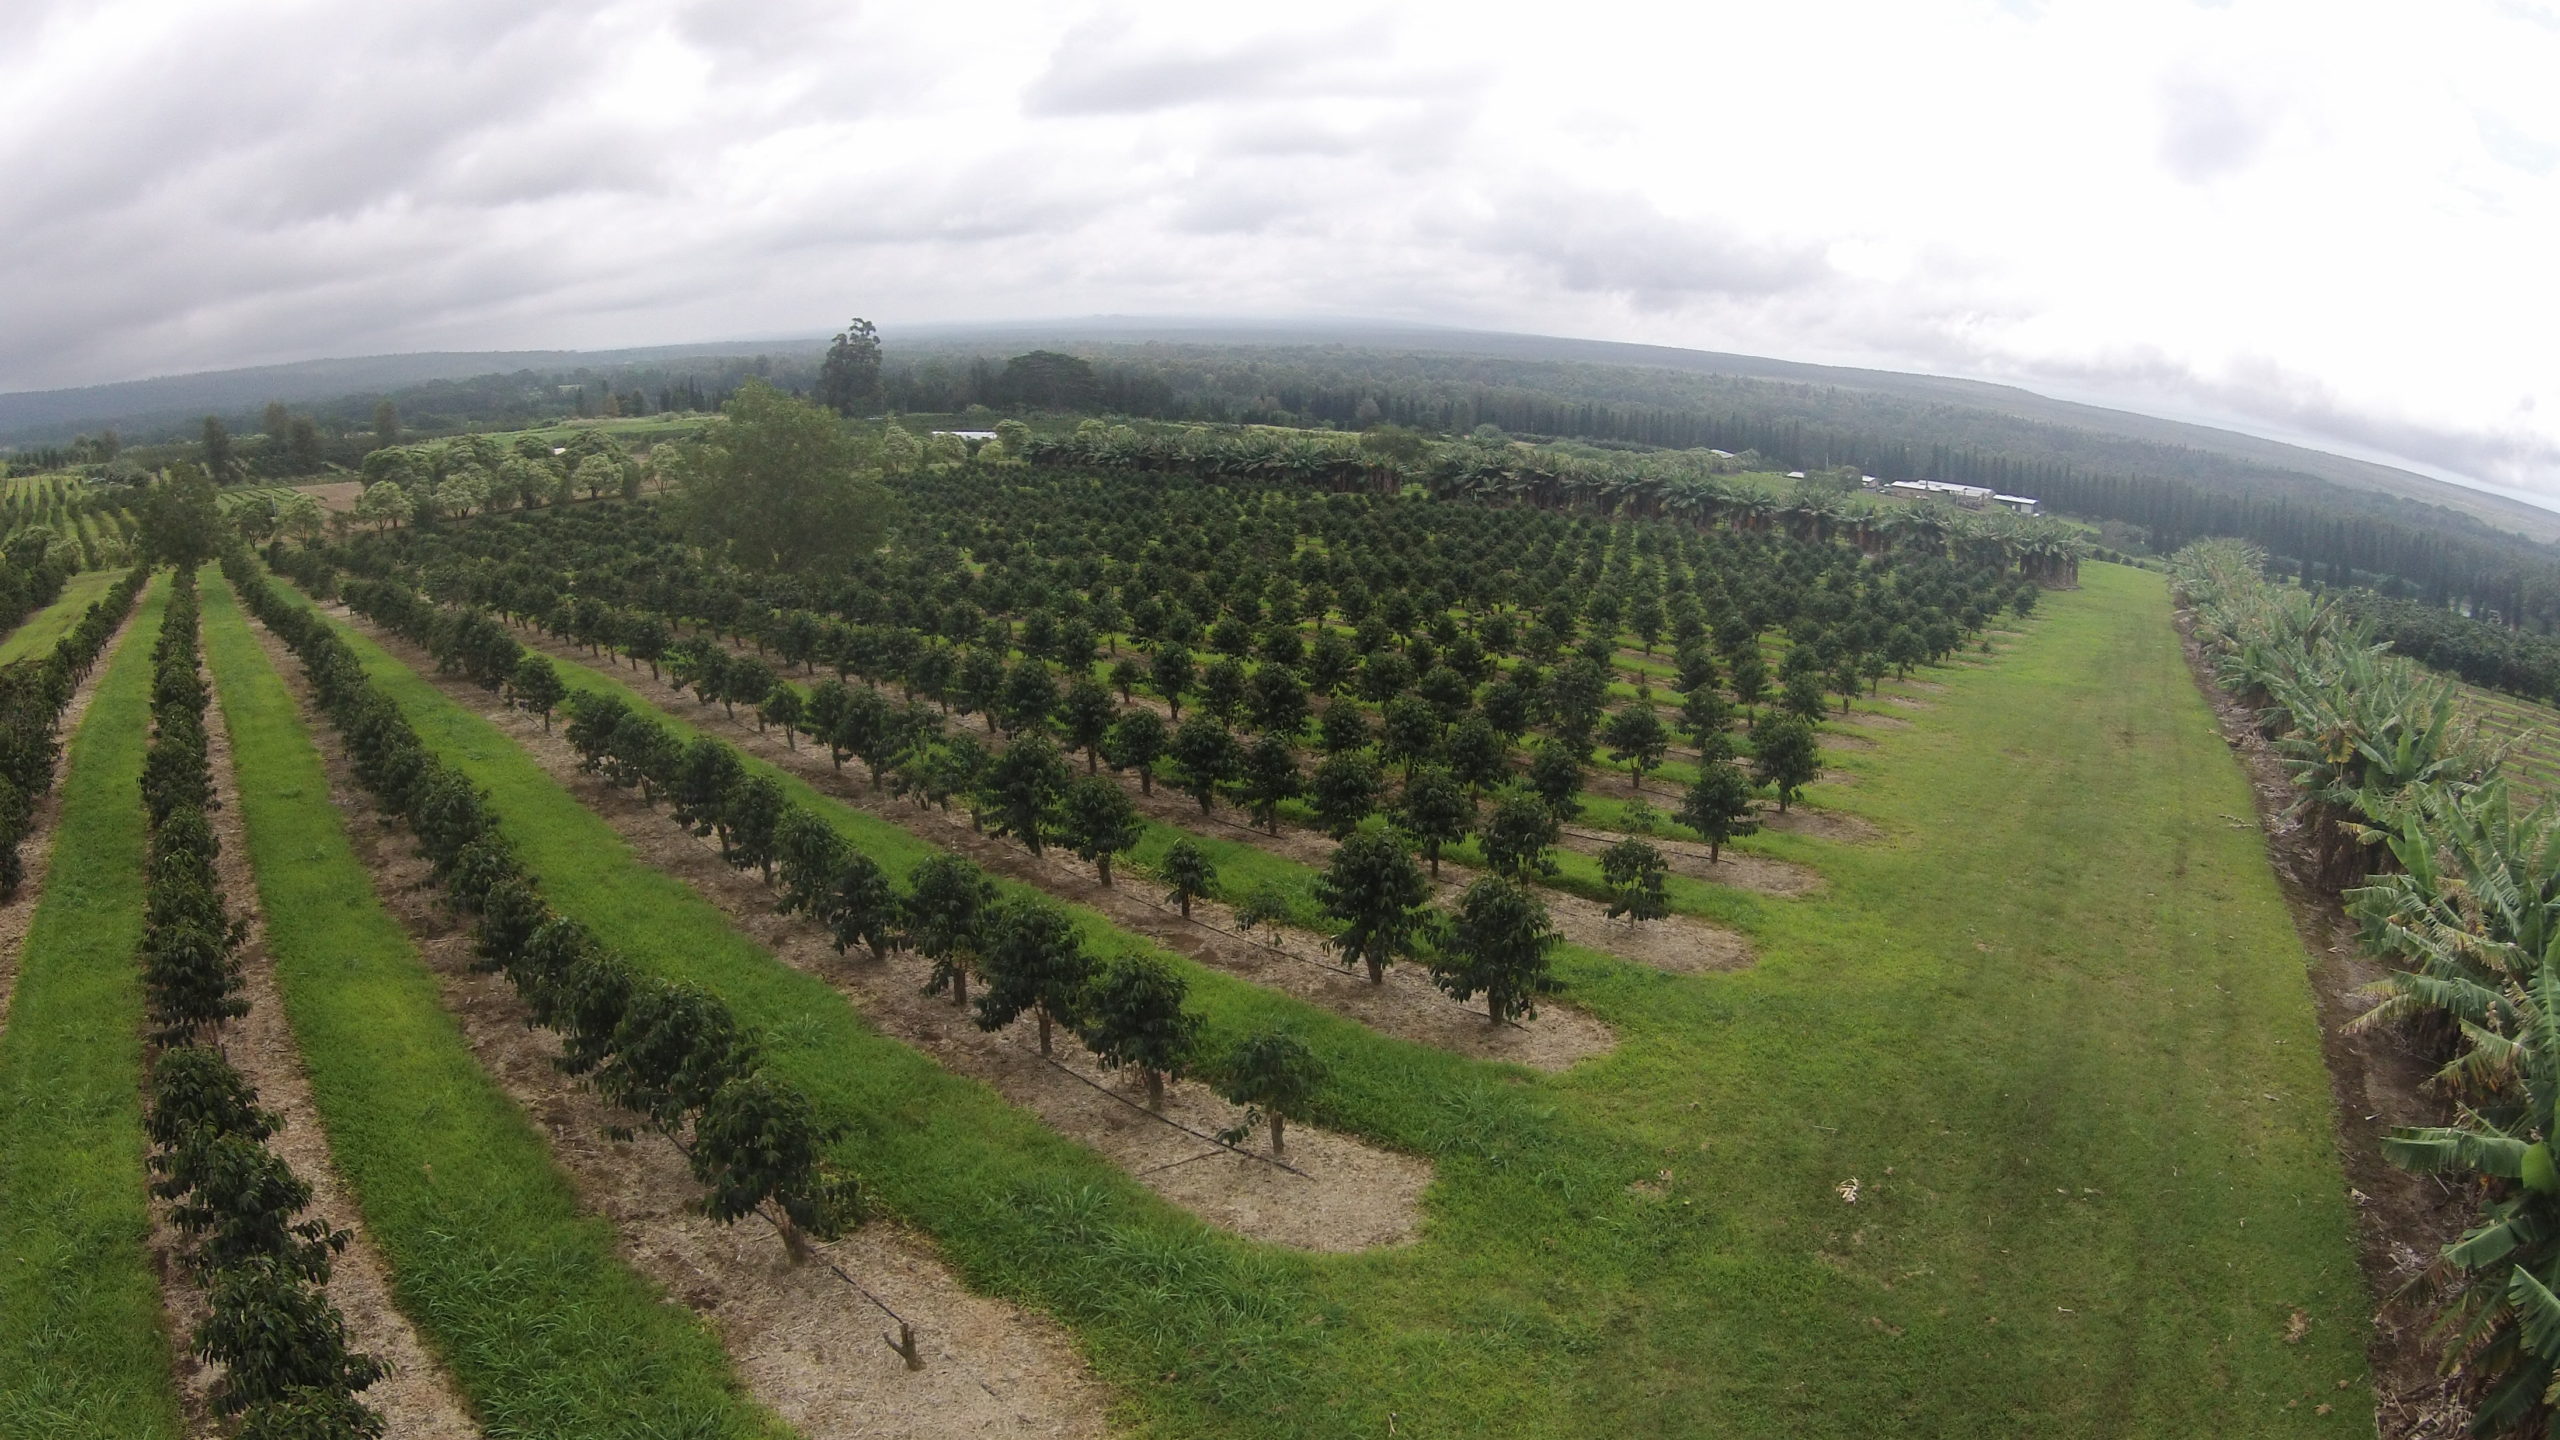 Drone view of coffee fields